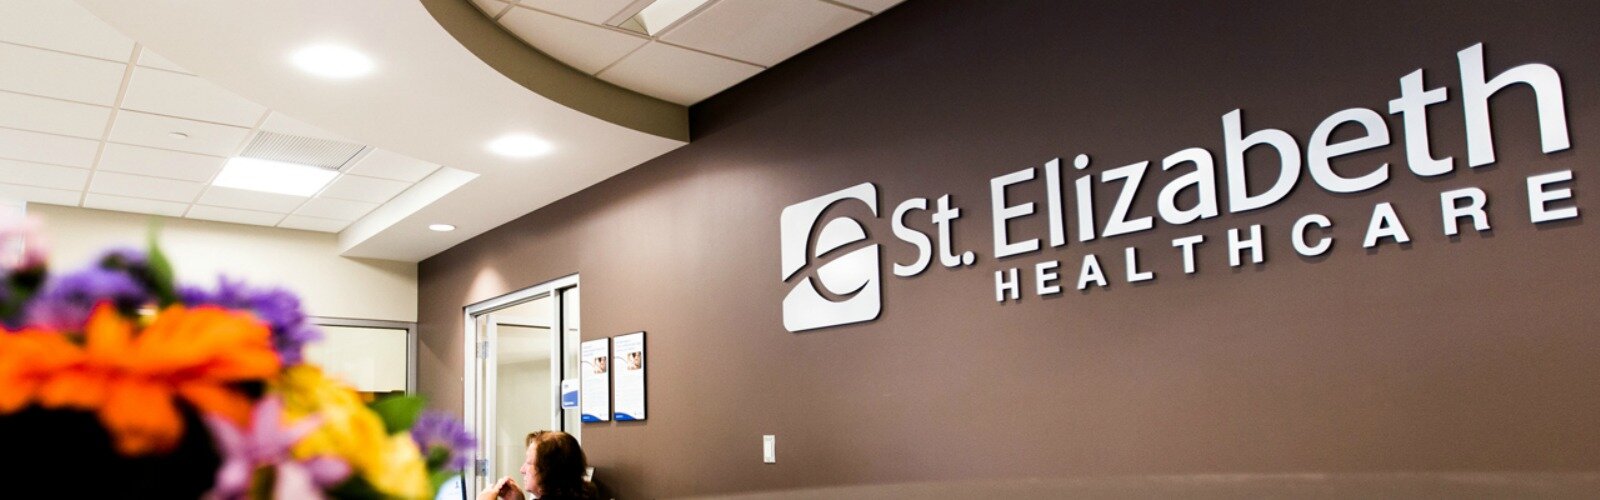 The St. Elizabeth's Cancer Center is slated to open in Fall 2020.